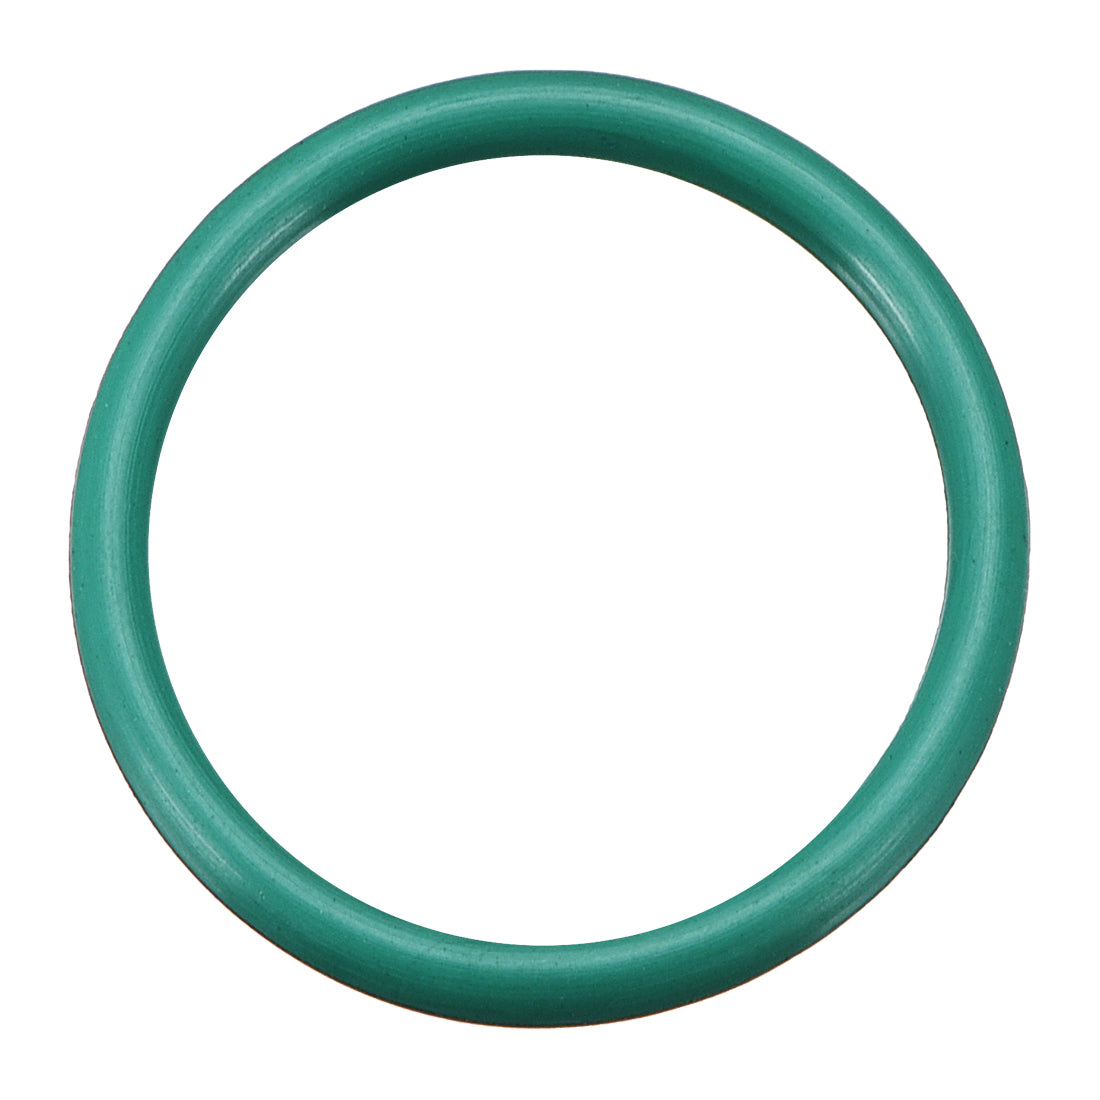 uxcell Uxcell O-Rings Fluorine Rubber 25mm x 30.3mm x 2.65mm Seal Rings Sealing Gasket